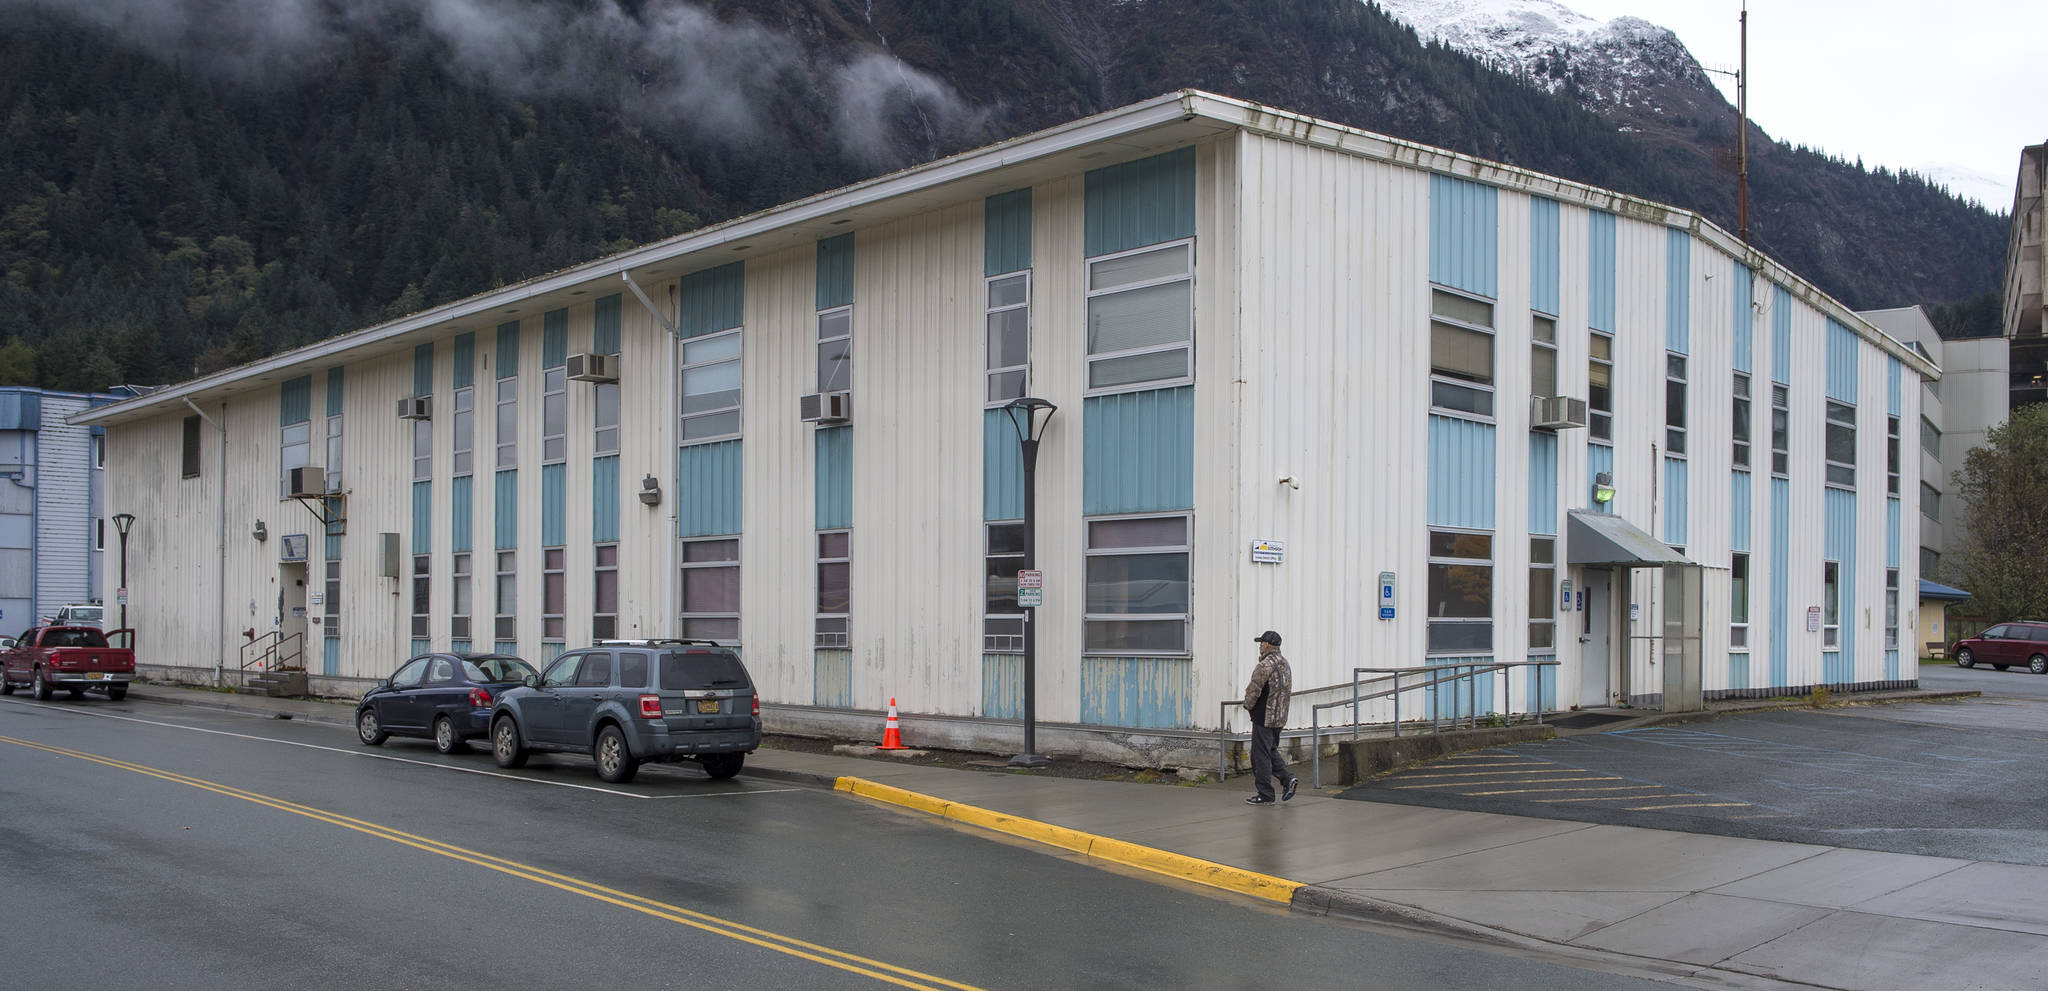 The former Public Safety Building on Whittier Street is the top choice for a warming center which could open Nov. 15 from 11 p.m. to 7 a.m. every night. (Michael Penn | Juneau Empire)